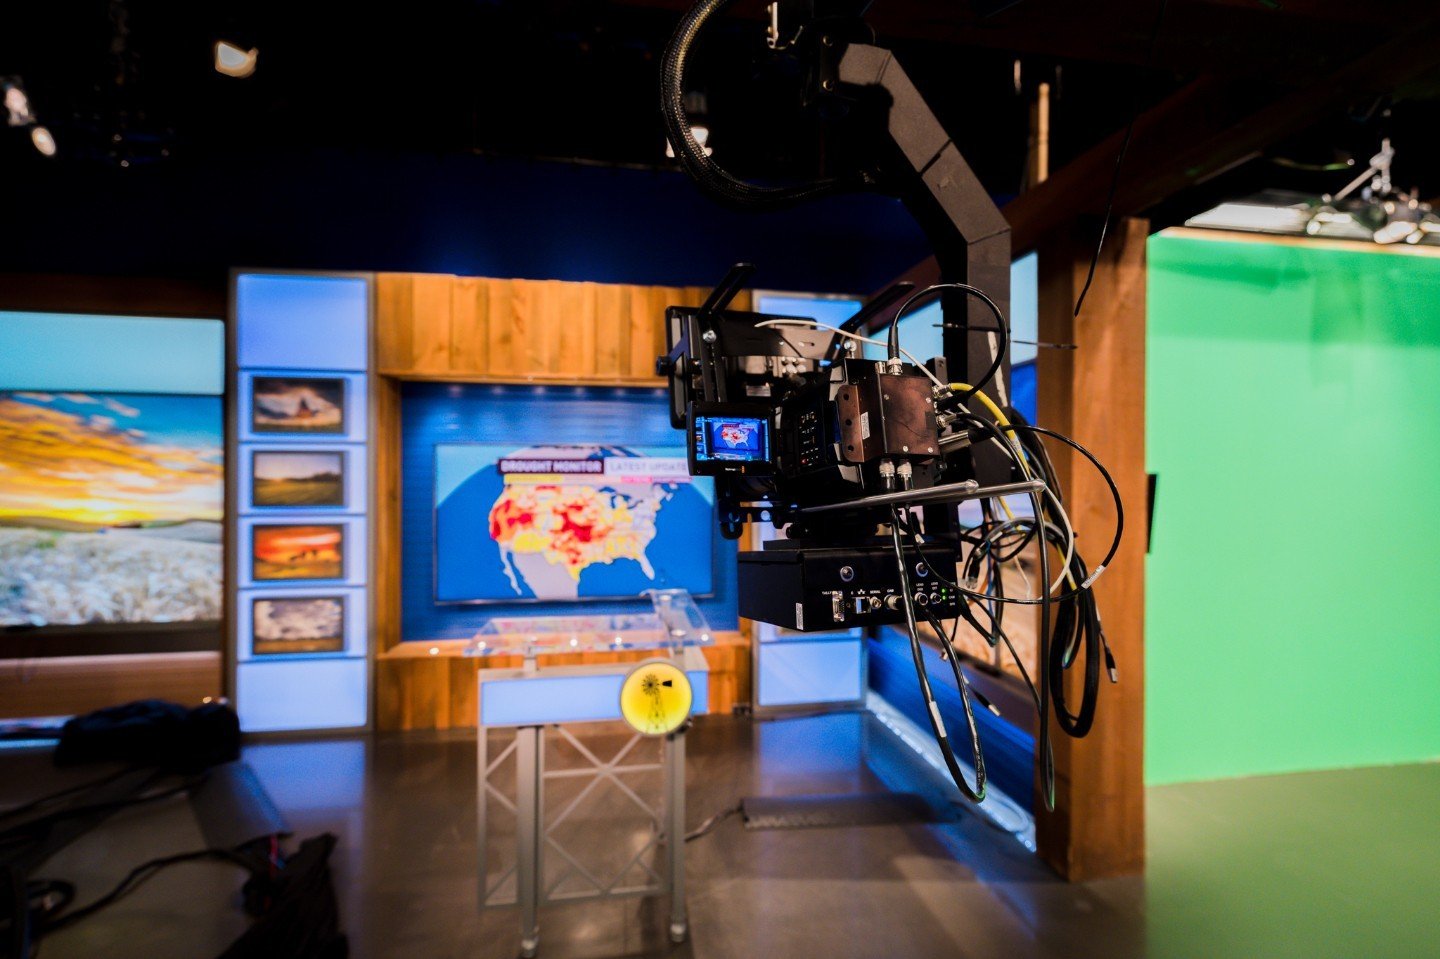 Ready to shine a spotlight on your business? 🌟 Let us capture the magic behind the scenes! Check out this fun shoot we did with @OfficialRFDTV in Nashville, showcasing their studio and broadcast team! 📸✨ #BusinessPhotography #BehindTheScenes #TeamW